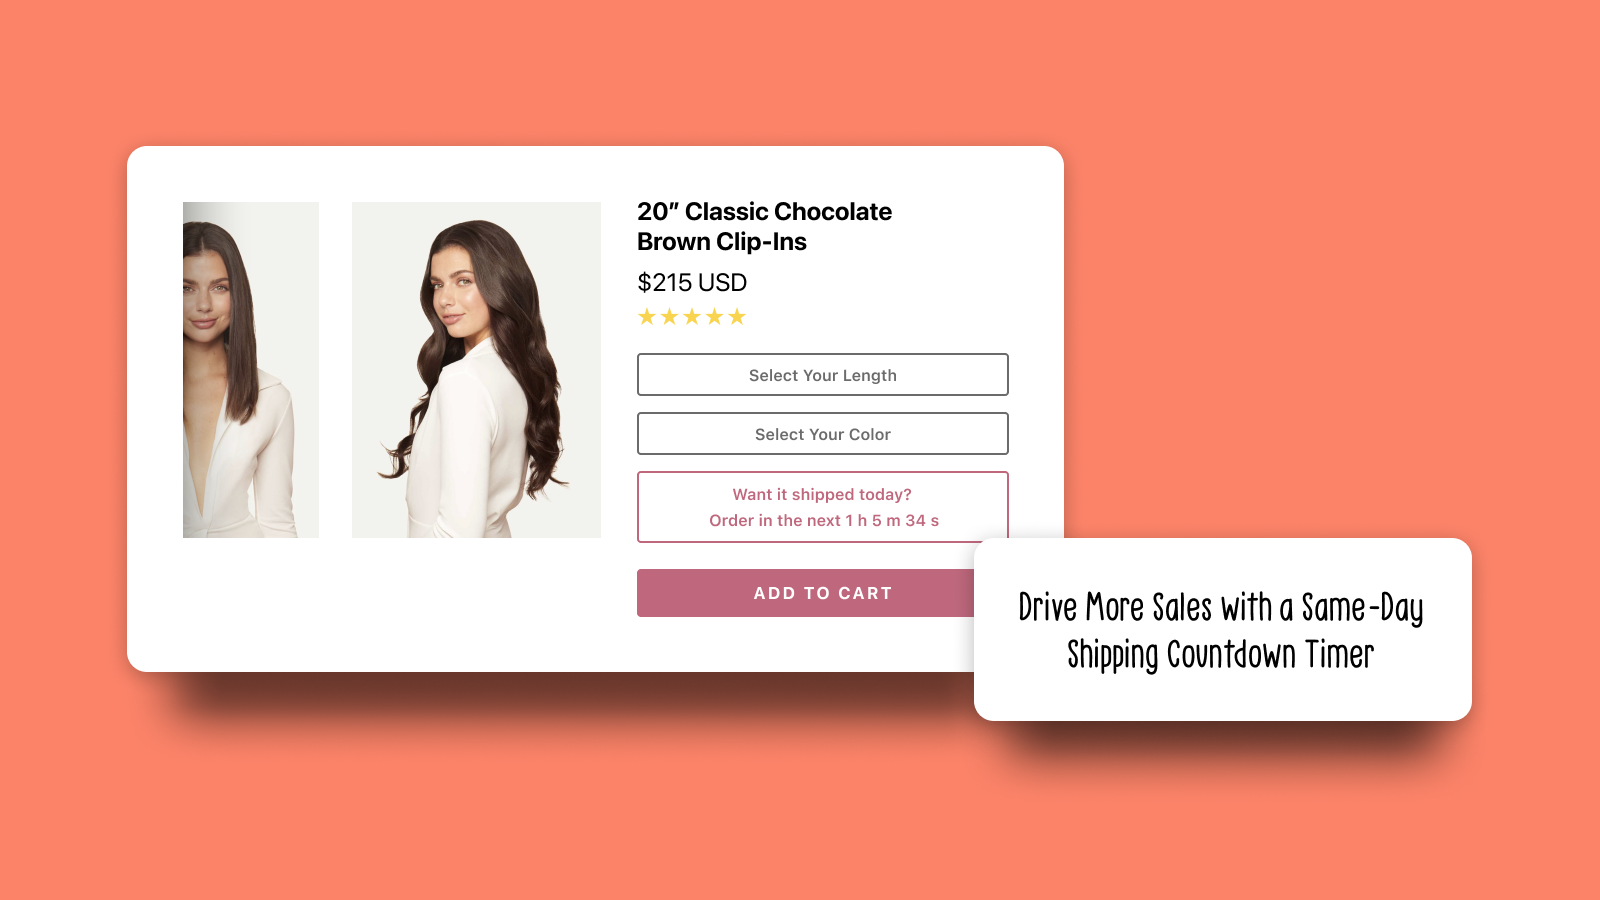 Drive More Sales with a Same-Day Shipping Countdown Timer